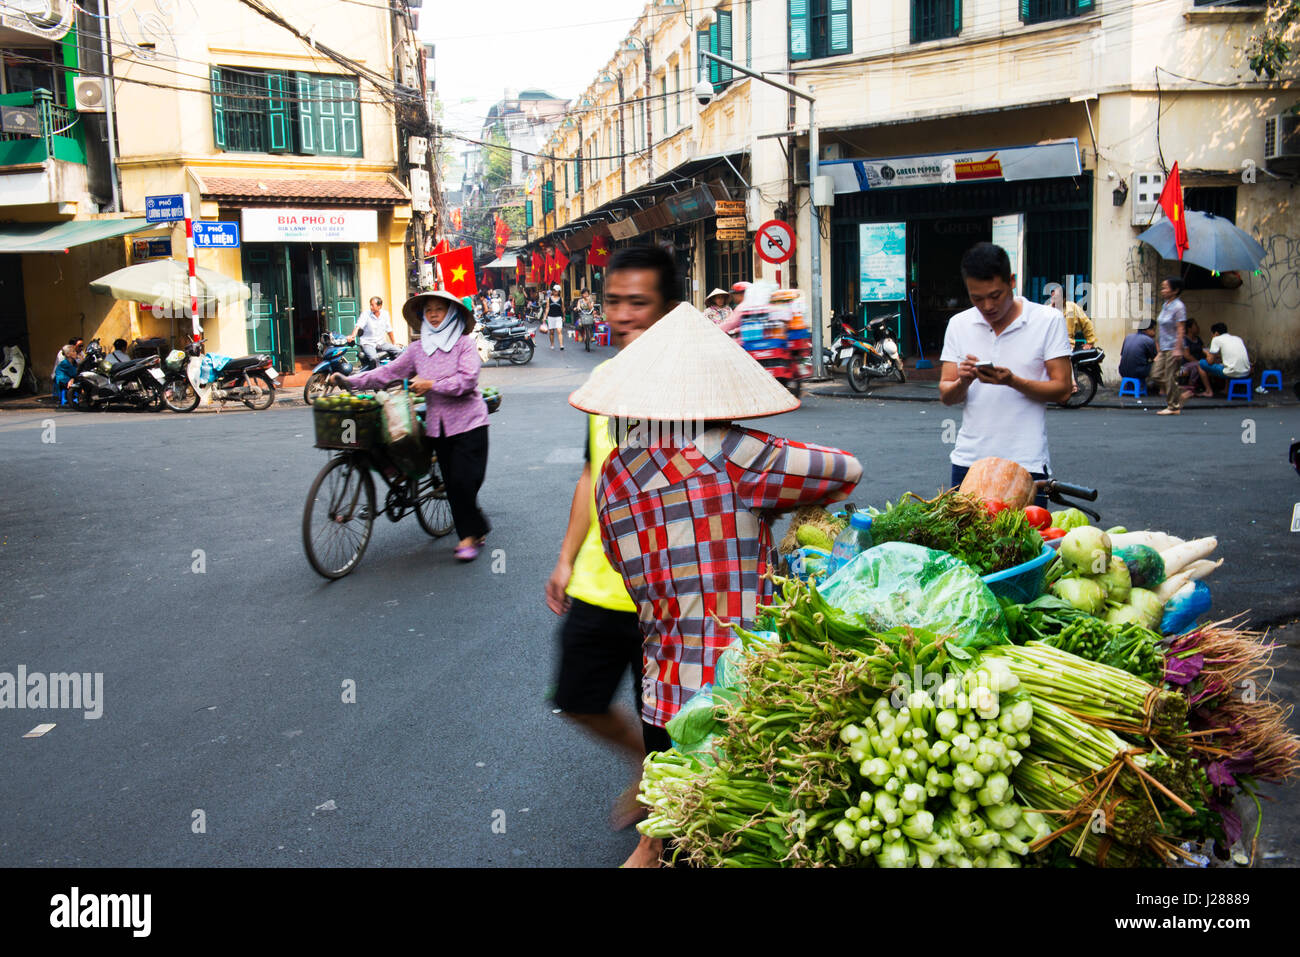 The colorful markets in the old city of Hanoi, Vietnam. Stock Photo